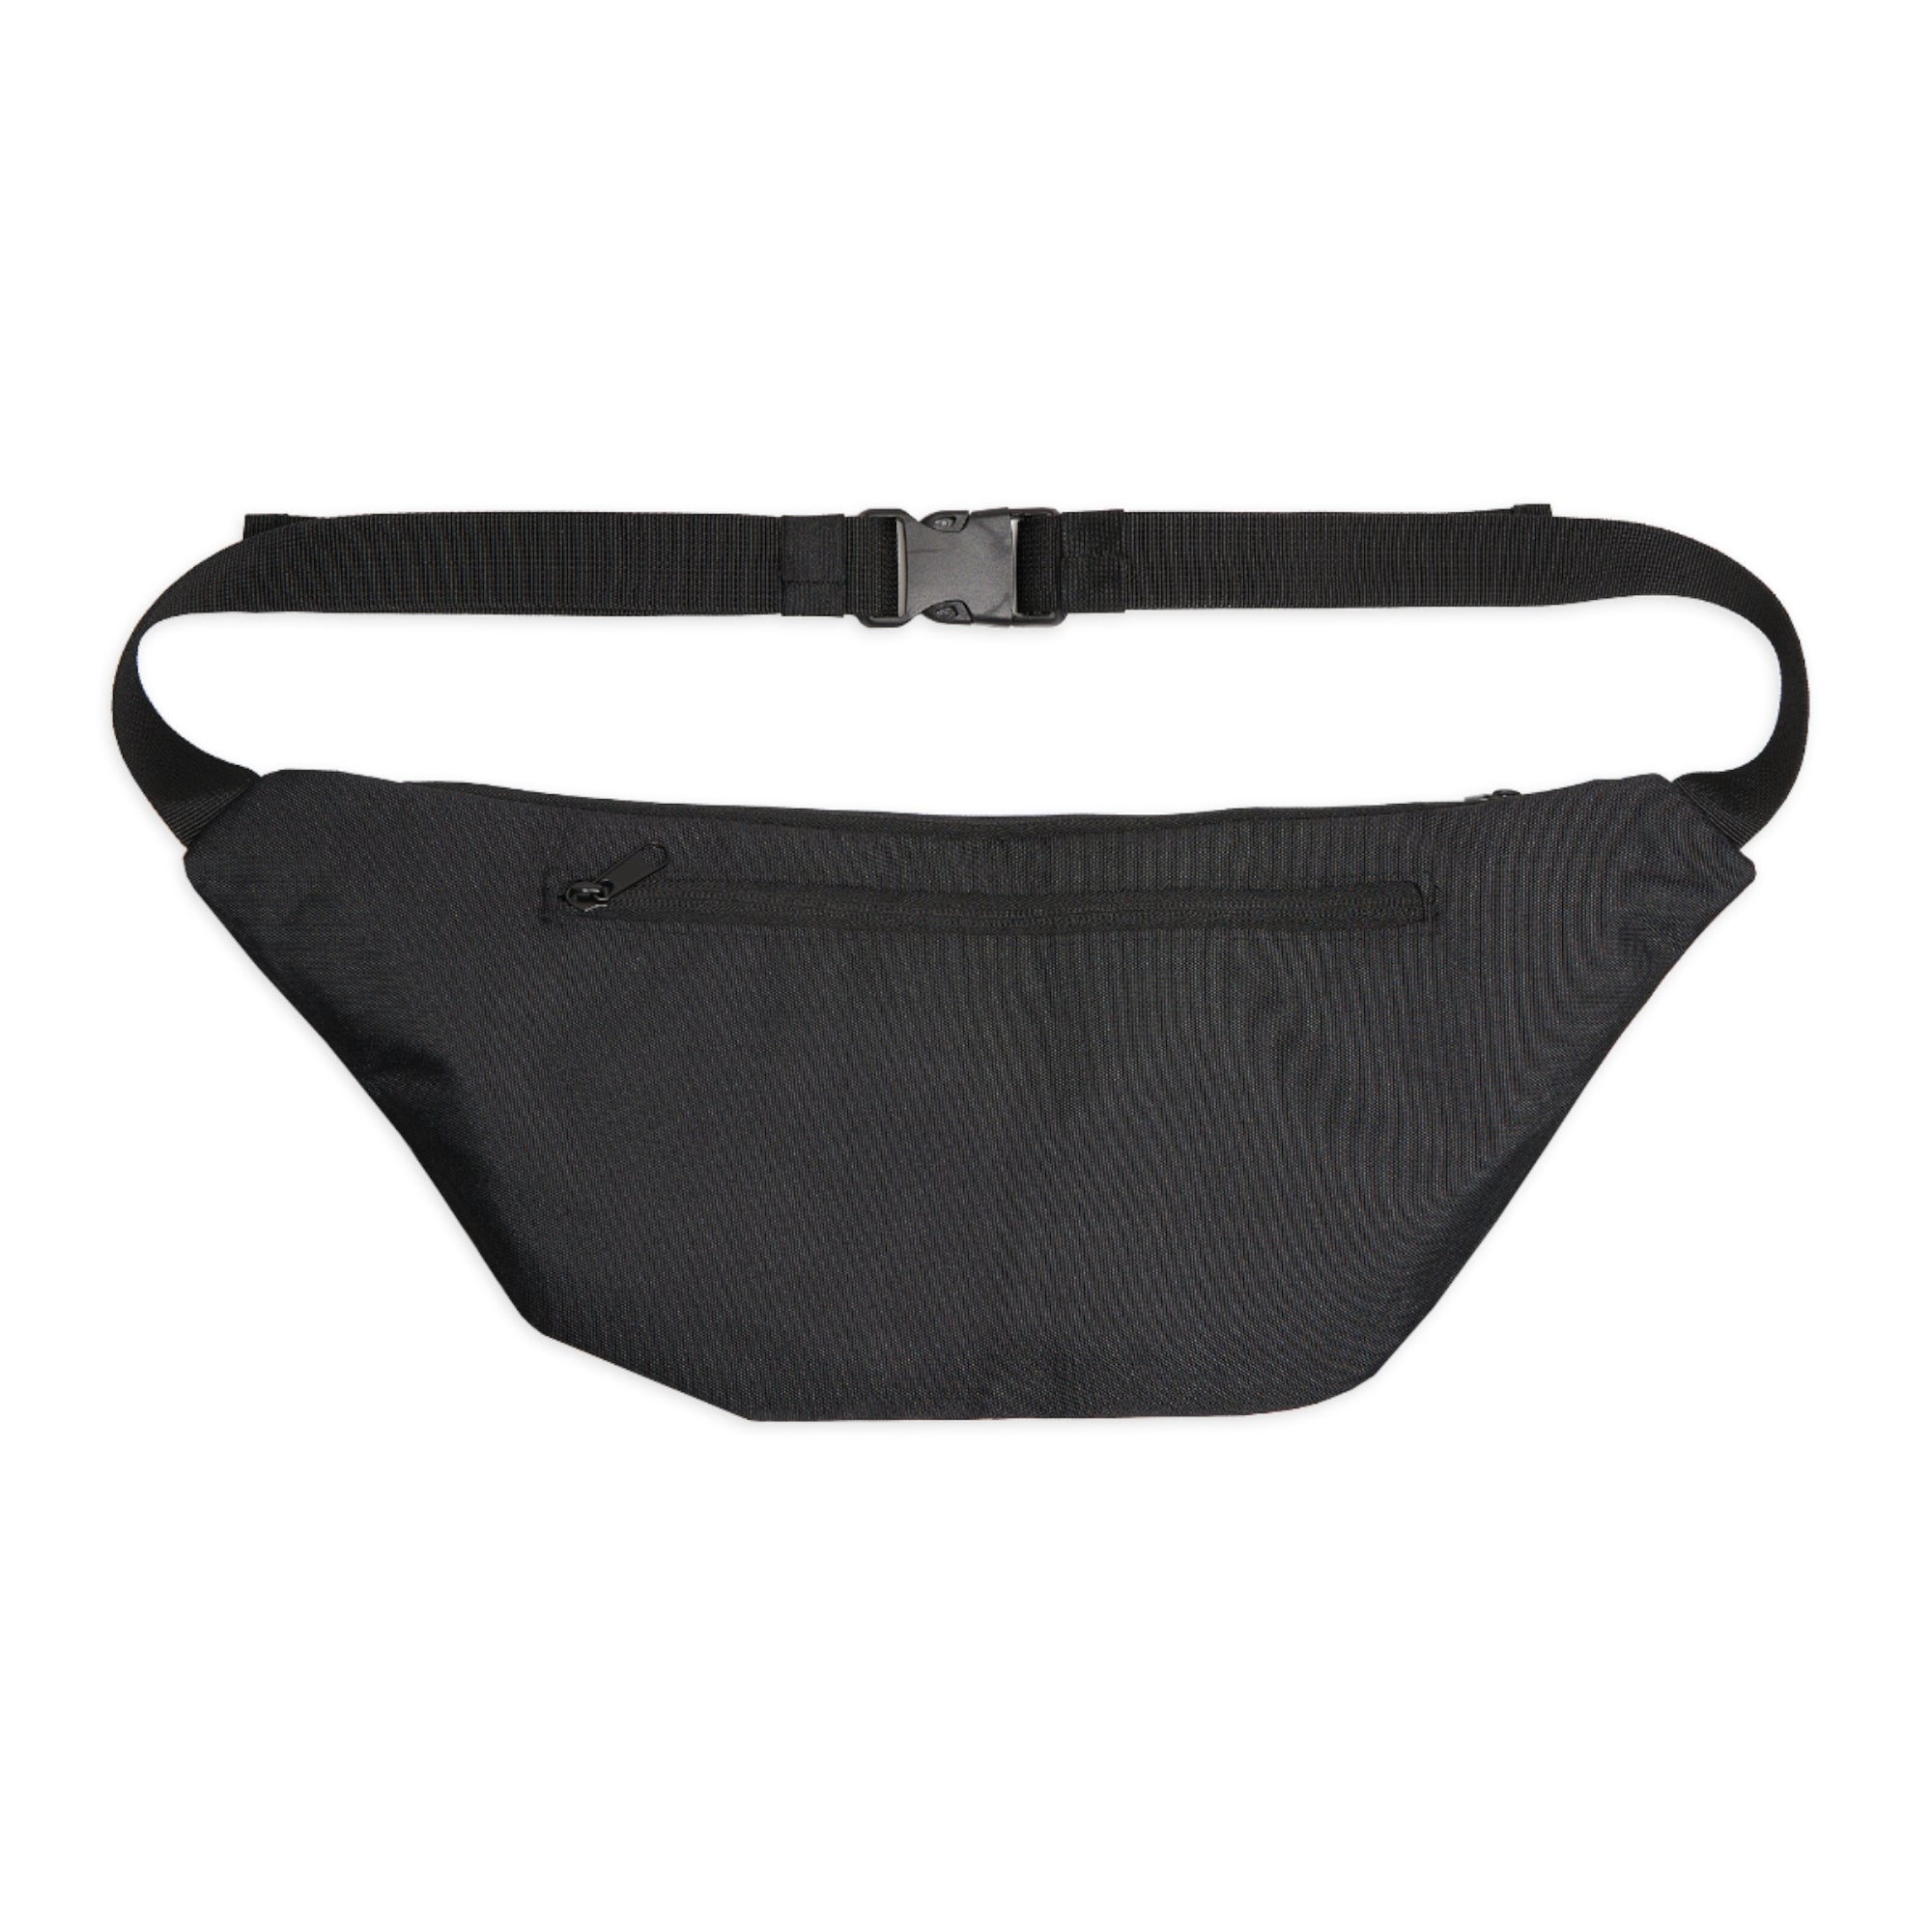 "Go For It!"-Fanny Pack Large